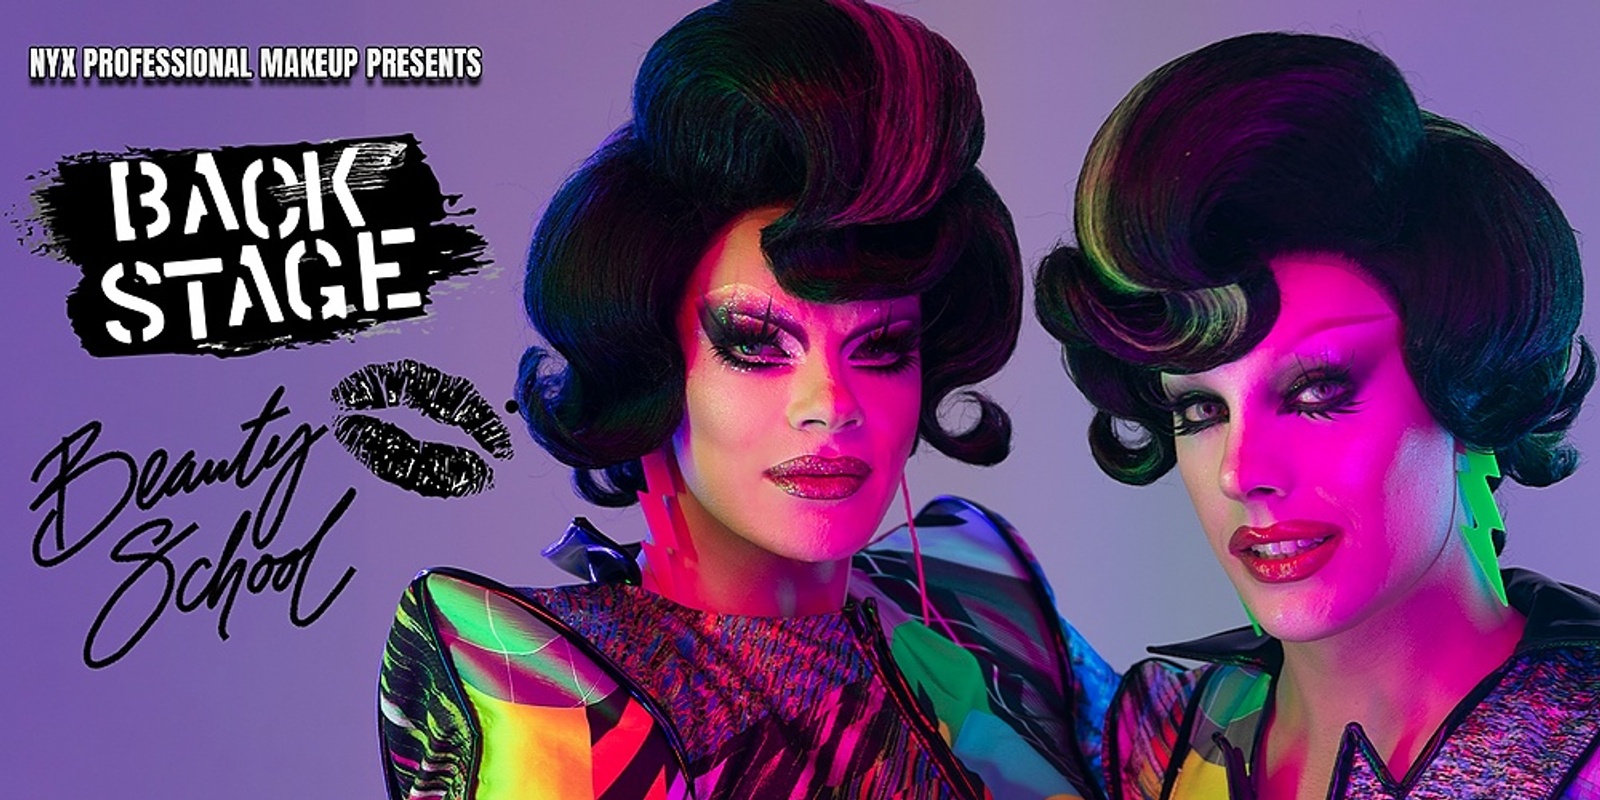 Banner image for Backstage Beauty School Sydney Presented by NYX Professional Makeup